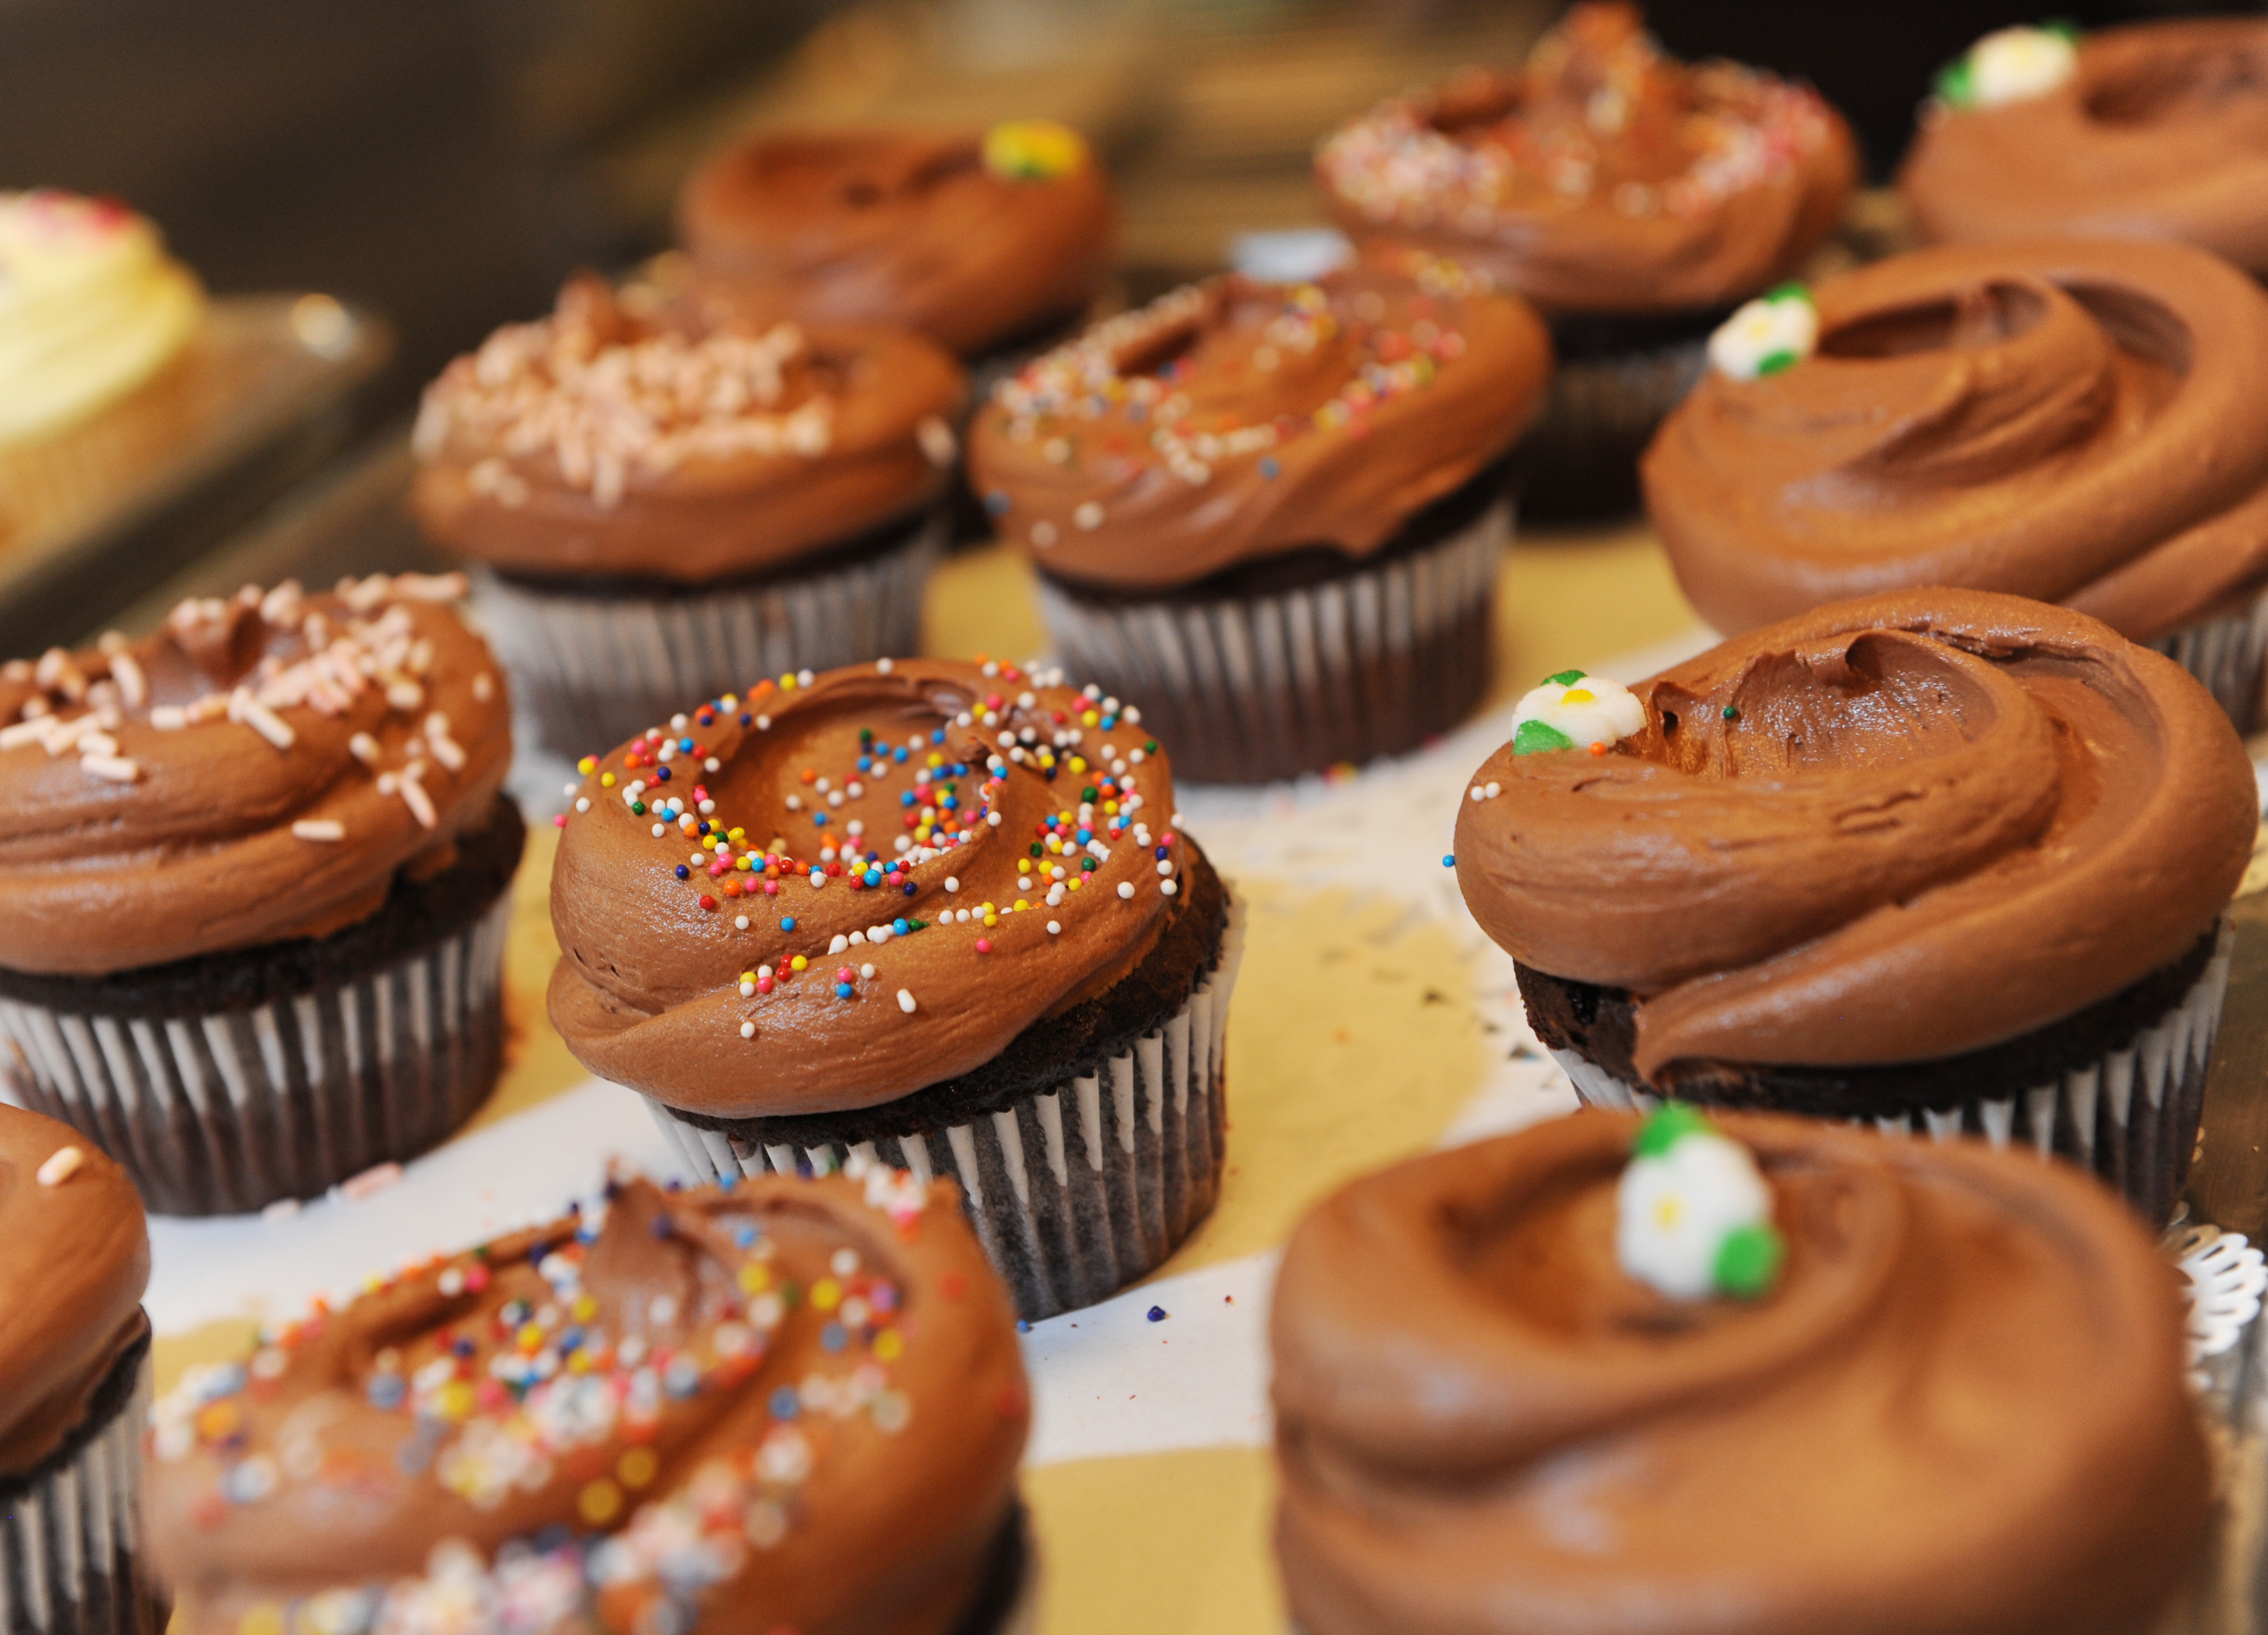 Cupcakes on display at the Magnolia Bakery. (Photo/Stan Honda/AFP/Getty Images) 